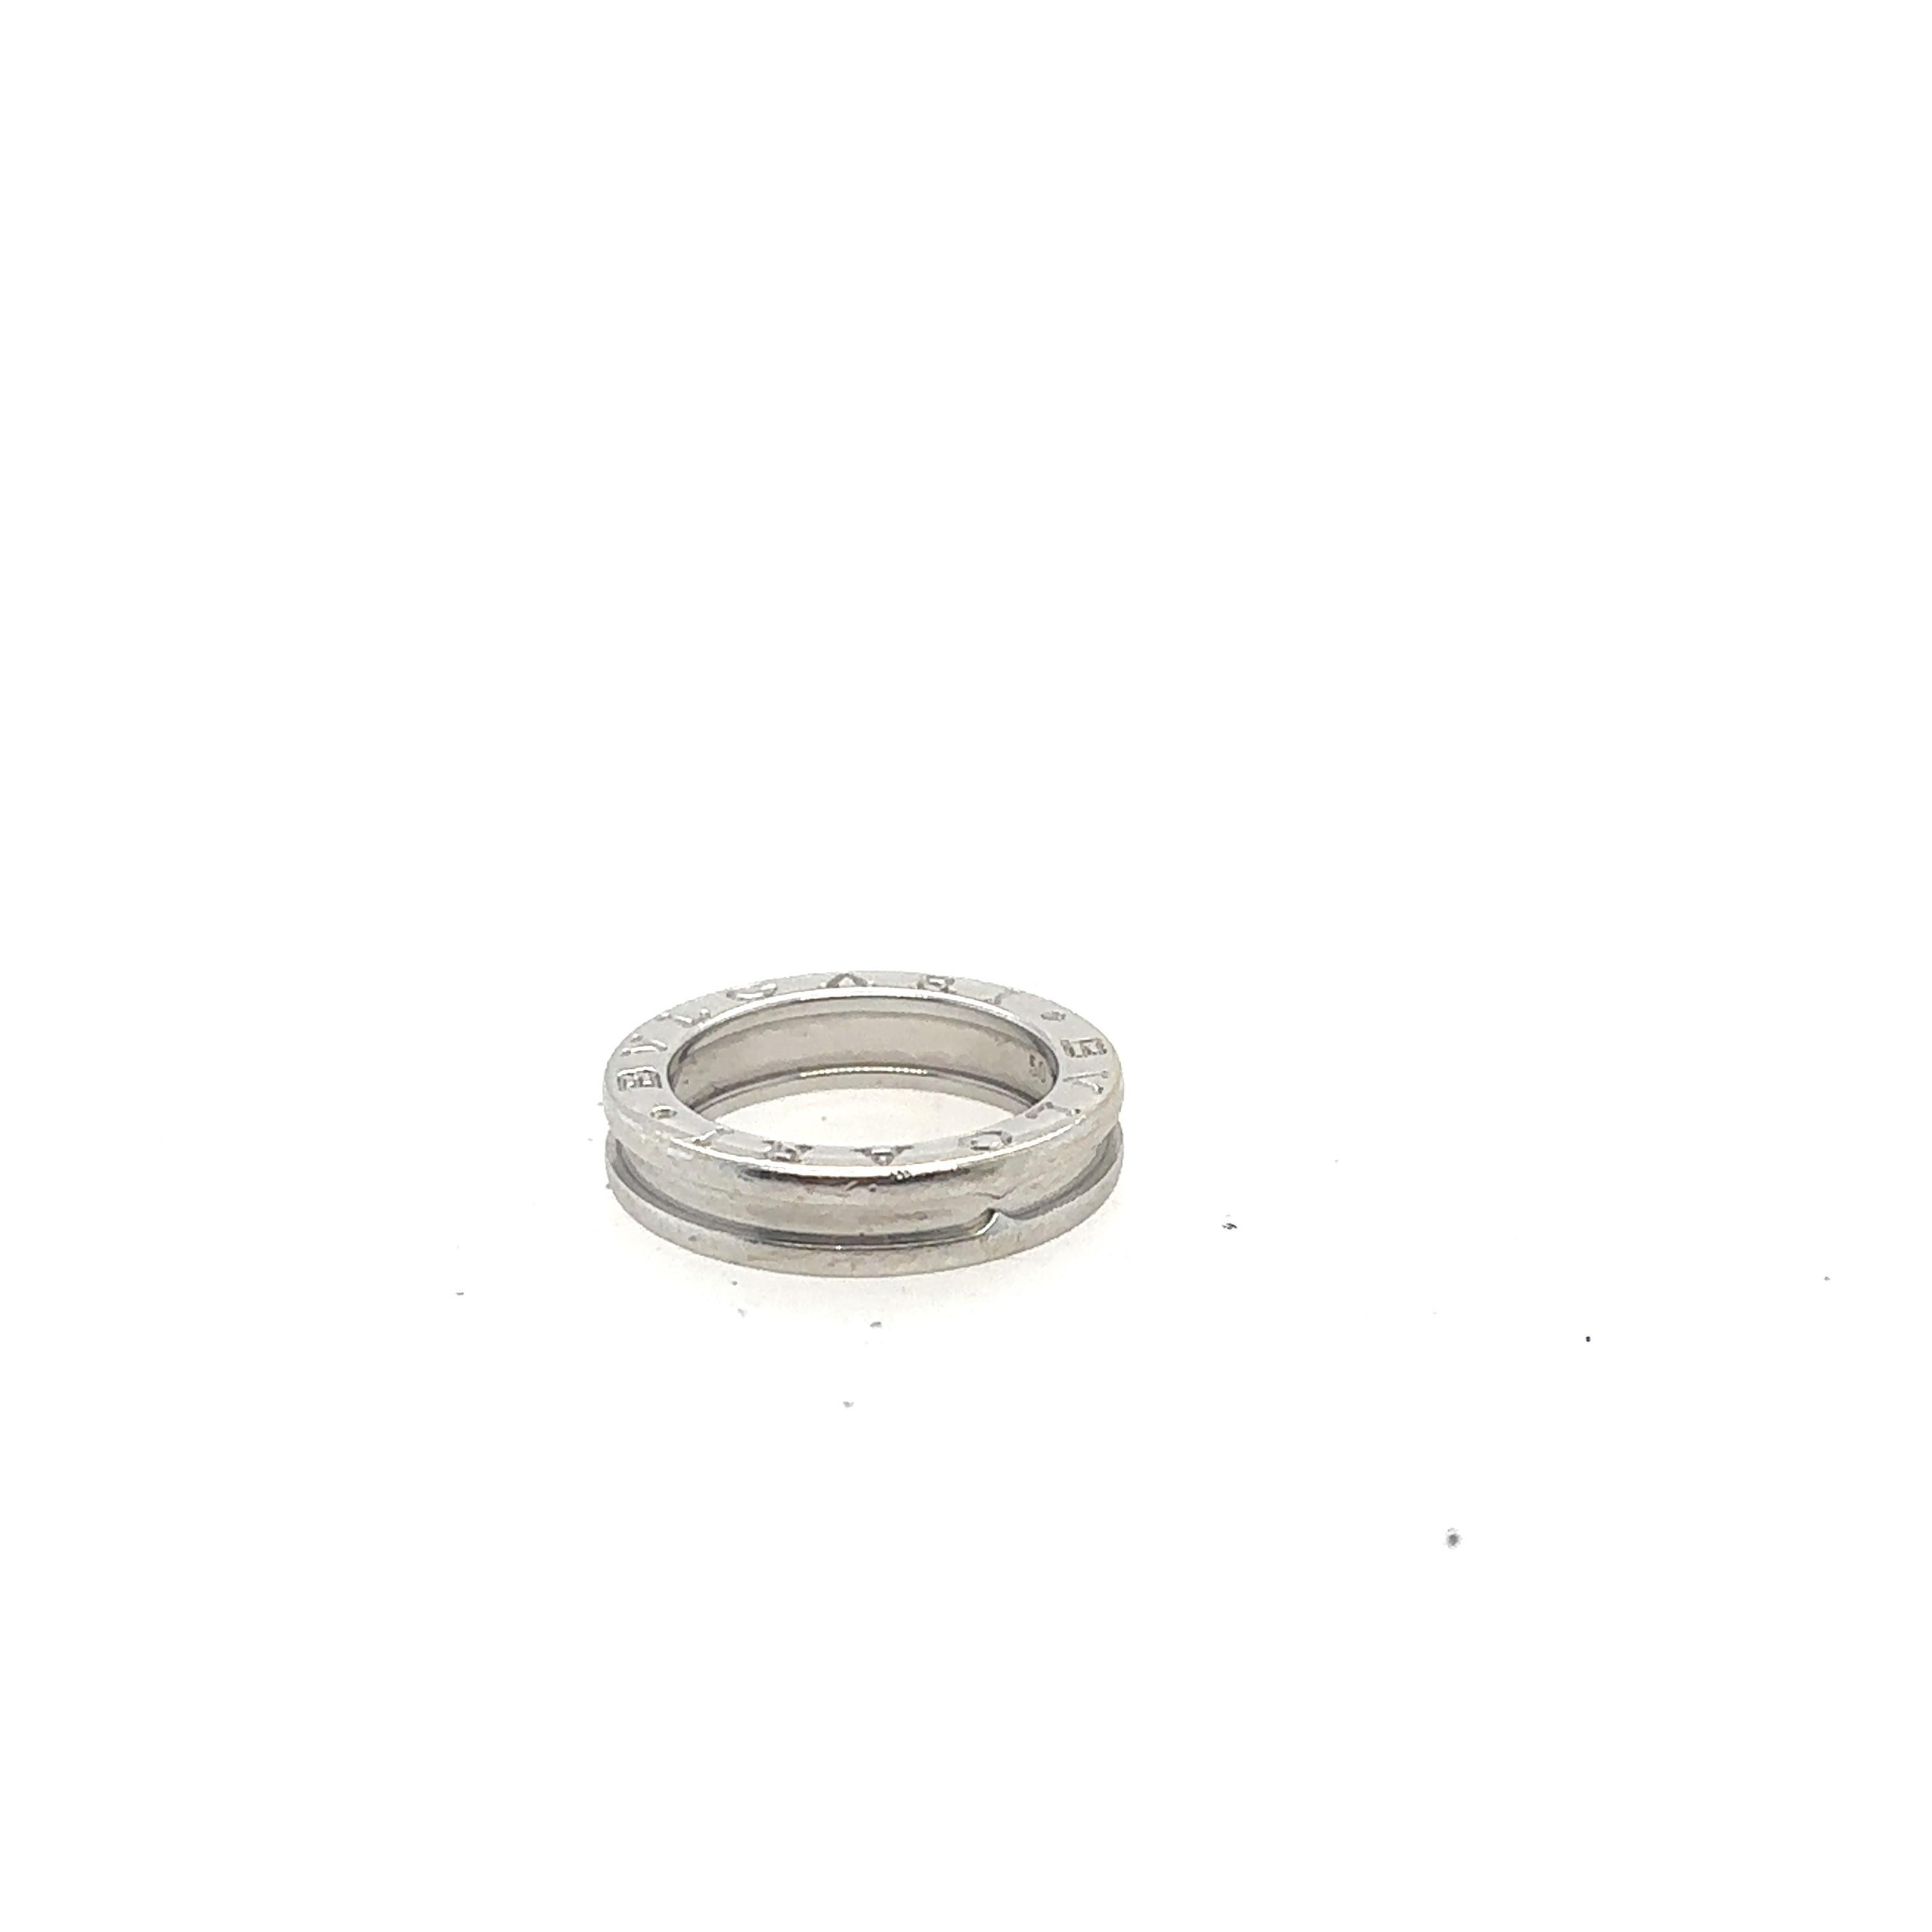 From the BVULGARI B Zero collection an 18k white gold 5mm single band. Stamped with BVULGARI around top of the ring, Size 5 and total weight 5.8 grams.